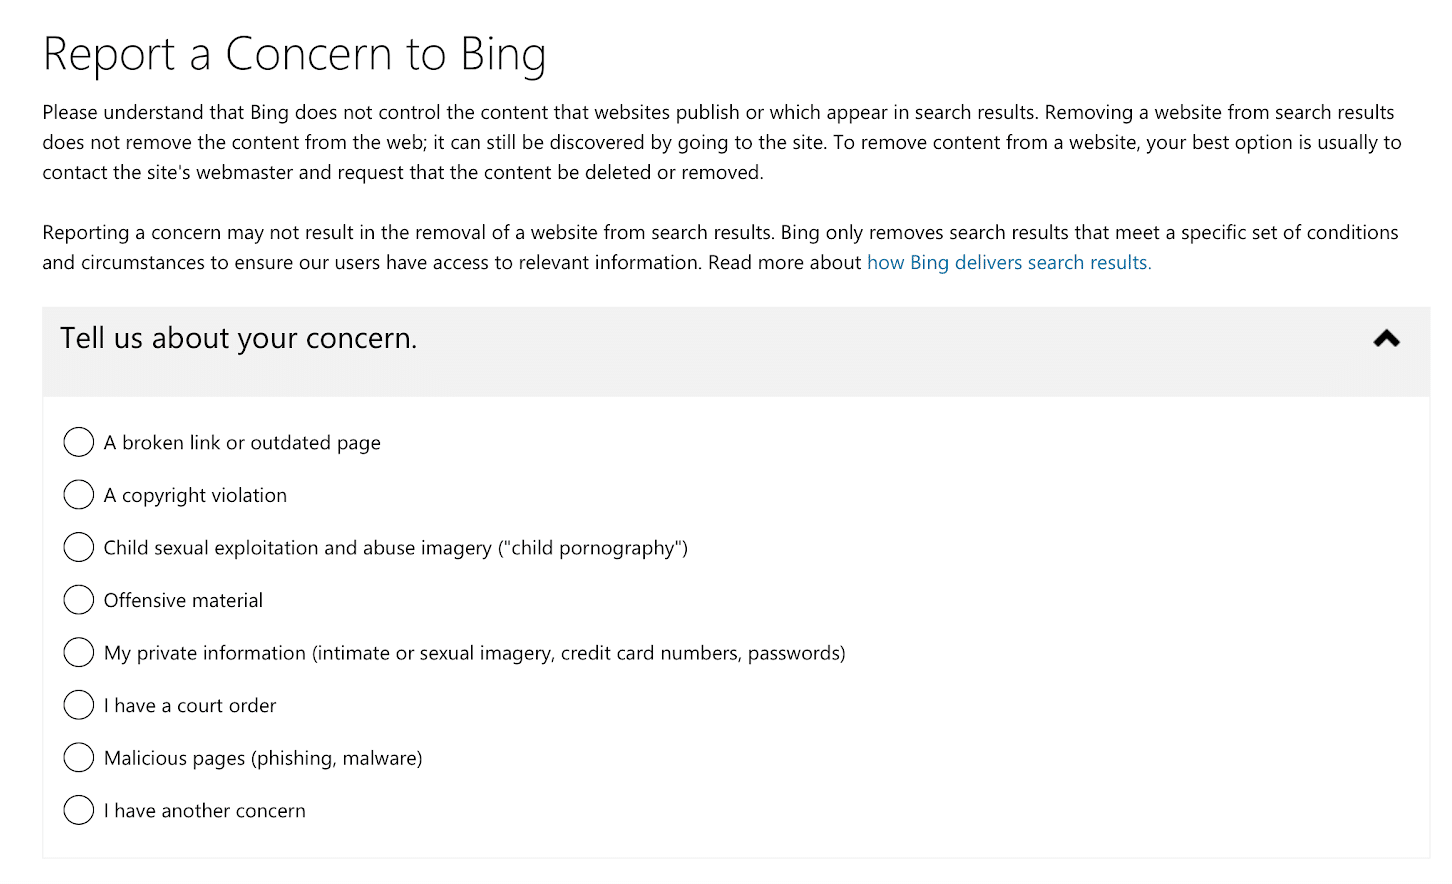 Report a Concern to Bing: I have a court order submission form